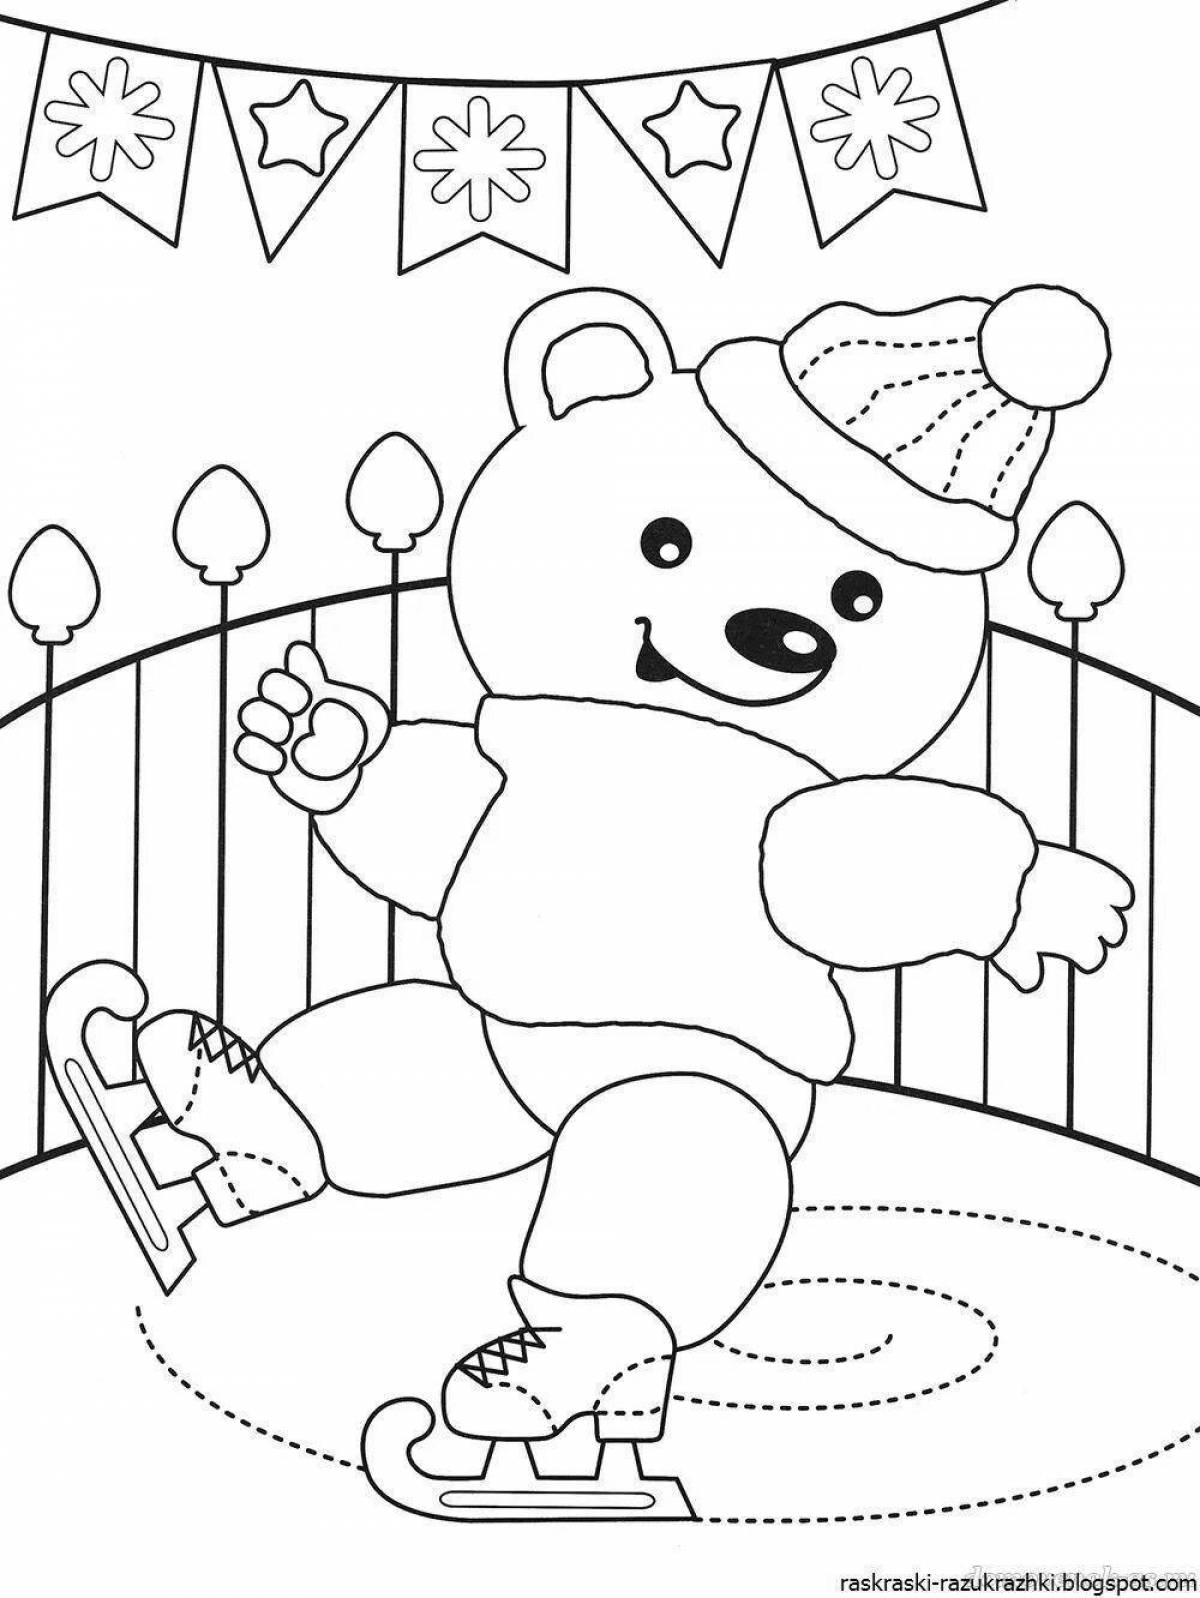 Coloring book snowy winter for children